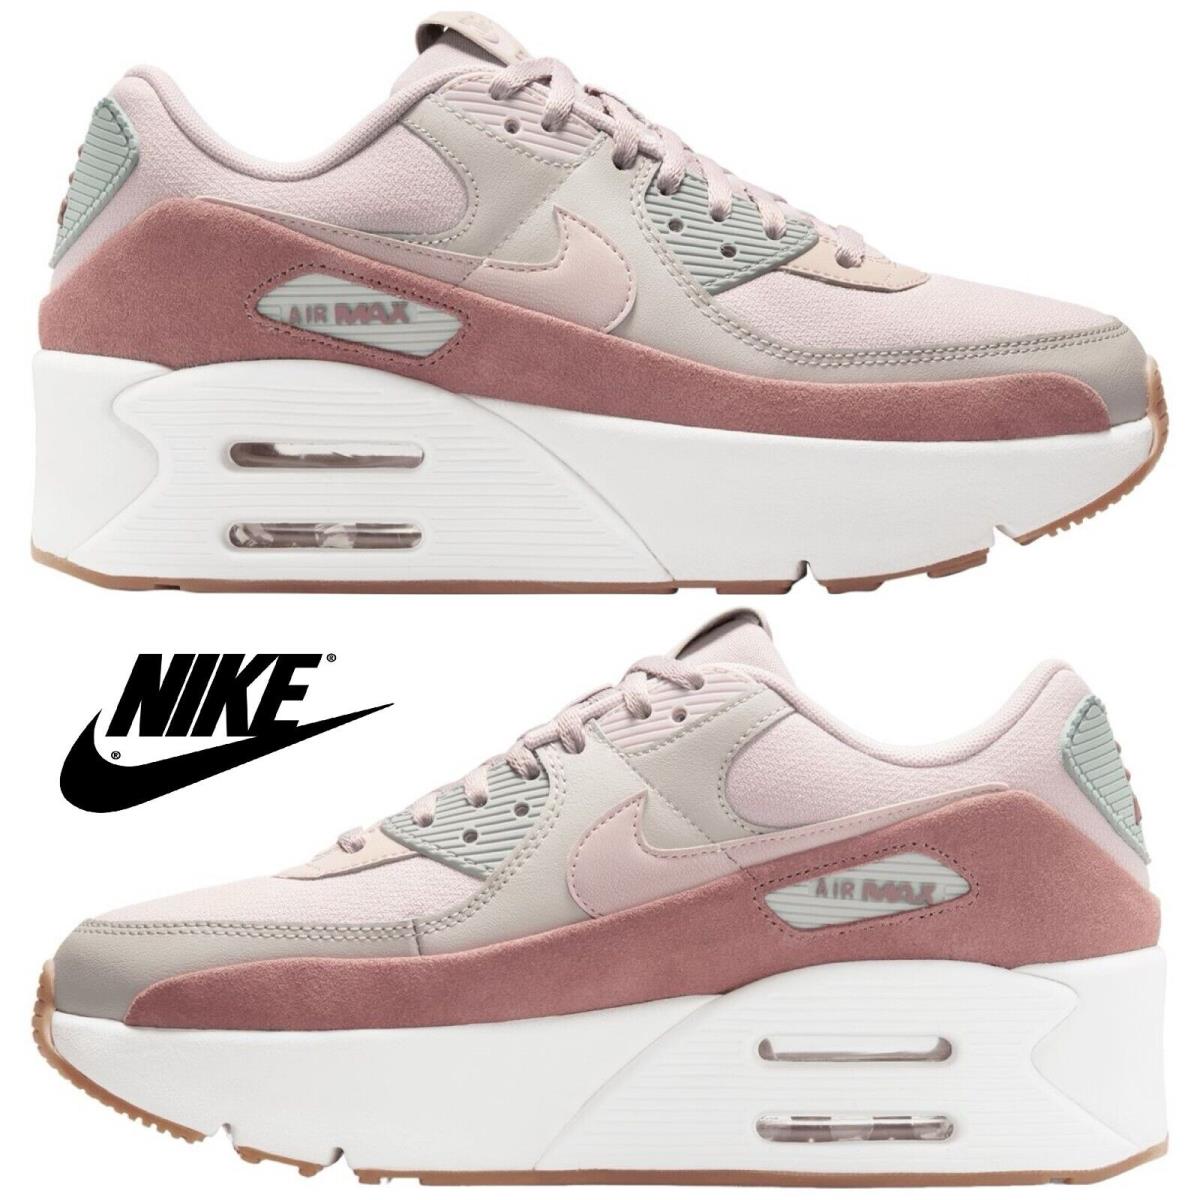 Nike Air Max 90 LV8 Women s Sneakers Casual Shoes Premium Running Sport Gym